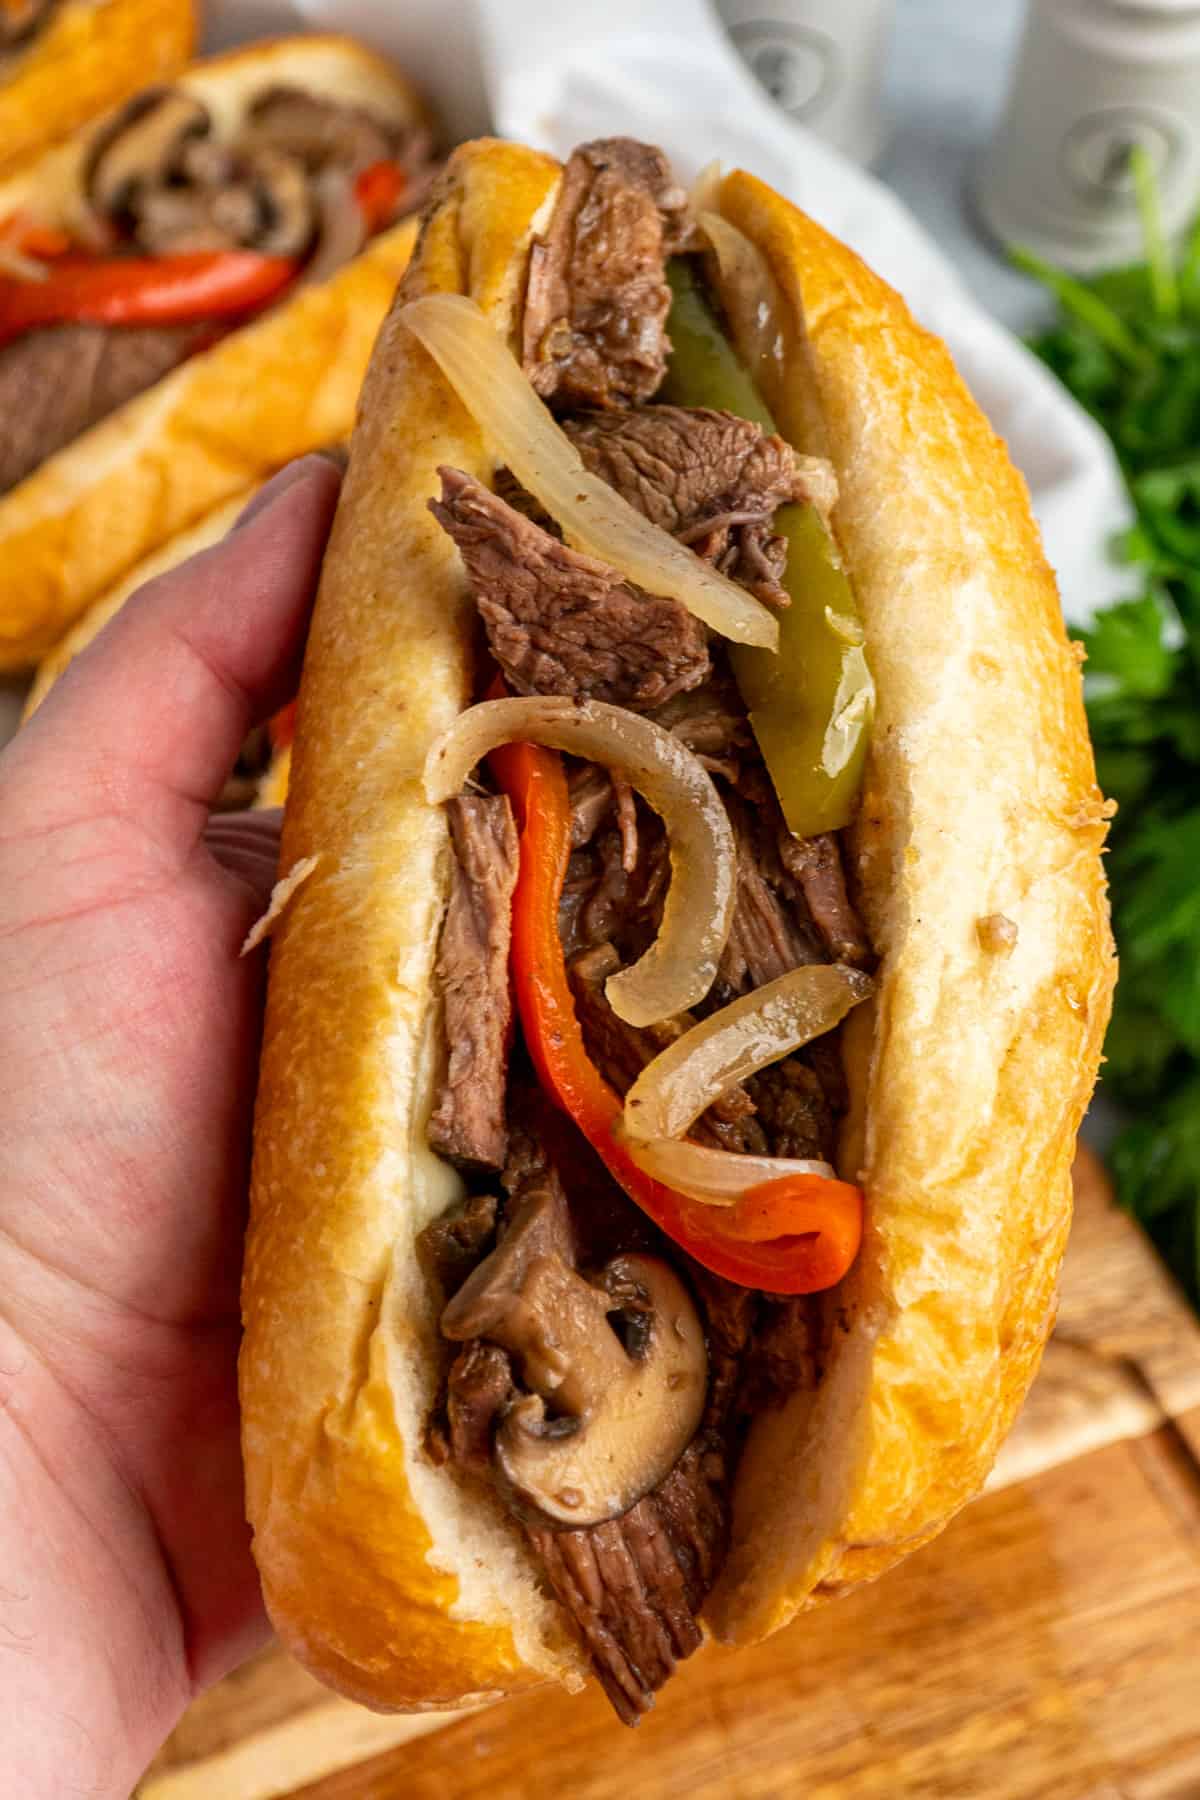 A hand holding a Philly cheesesteak sandwich in a hoagie roll.